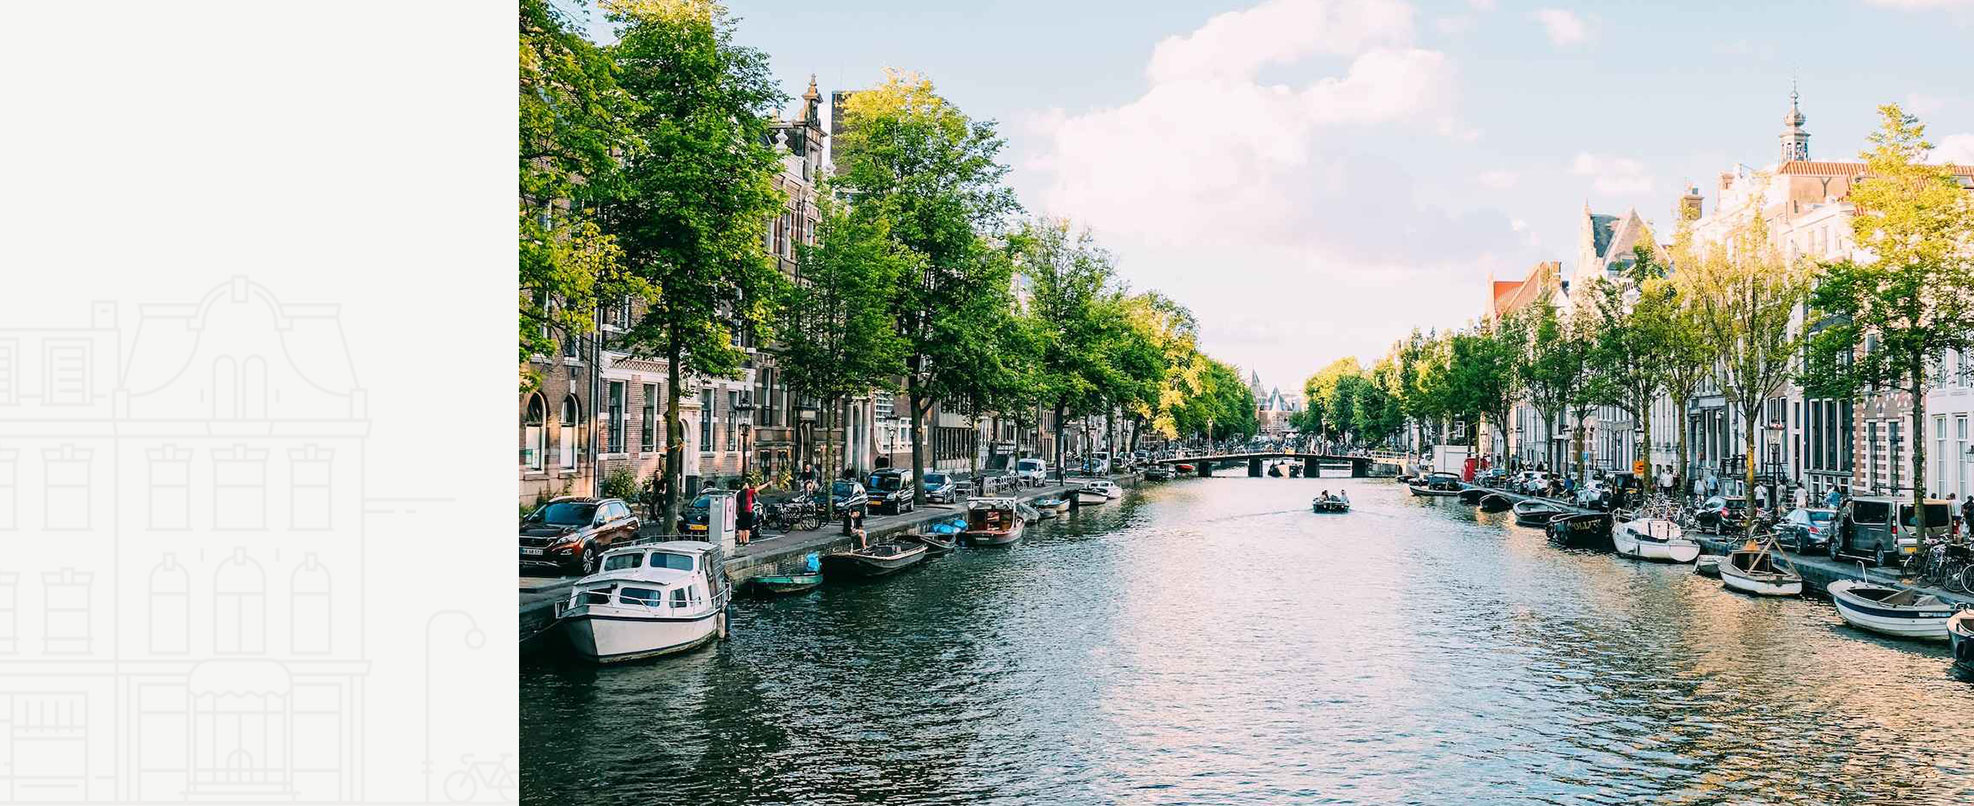 long term and short term furnished apartment, rental properties and corporate apartment we are relocation specialist in Amsterdam-Amstelveen Netherlands